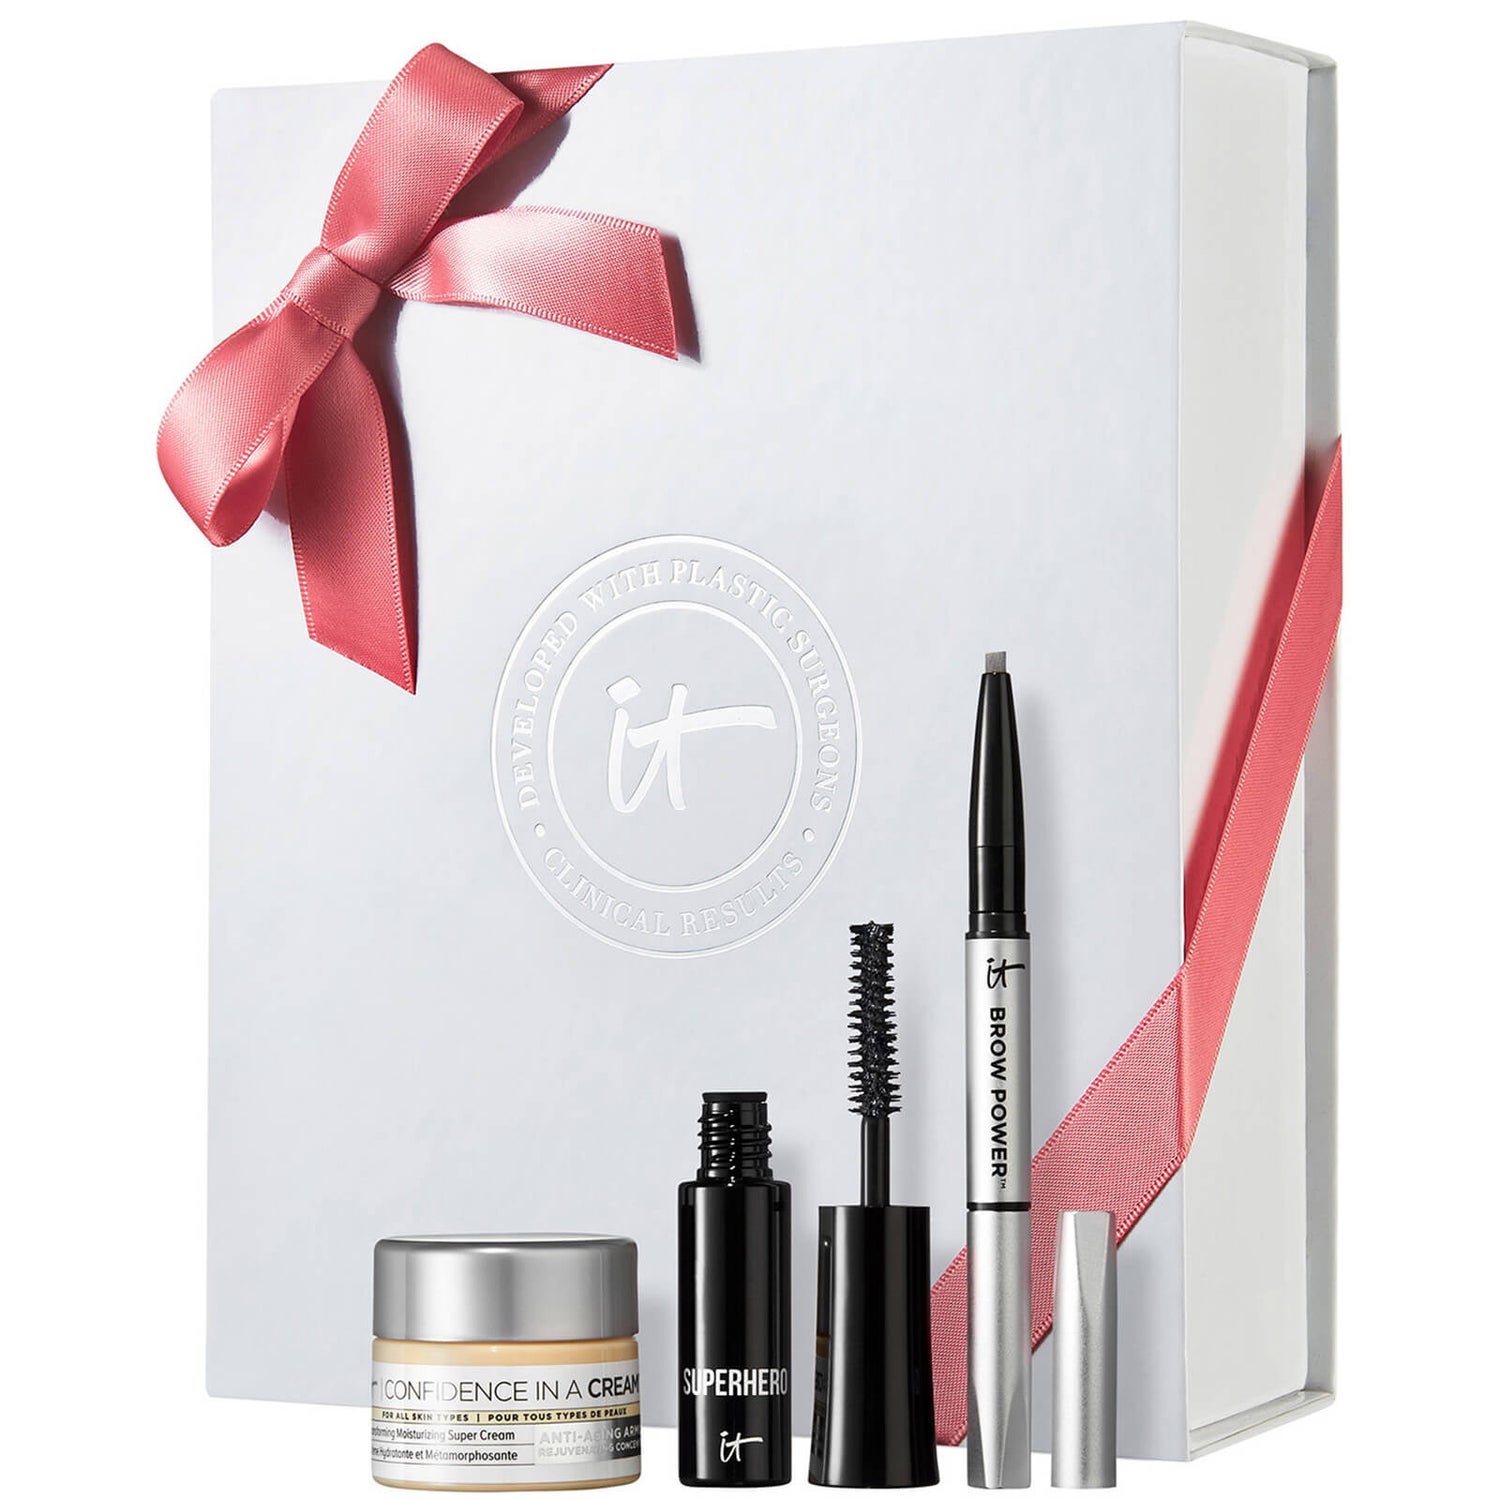 IT Cosmetics Discover IT Introductory Kit